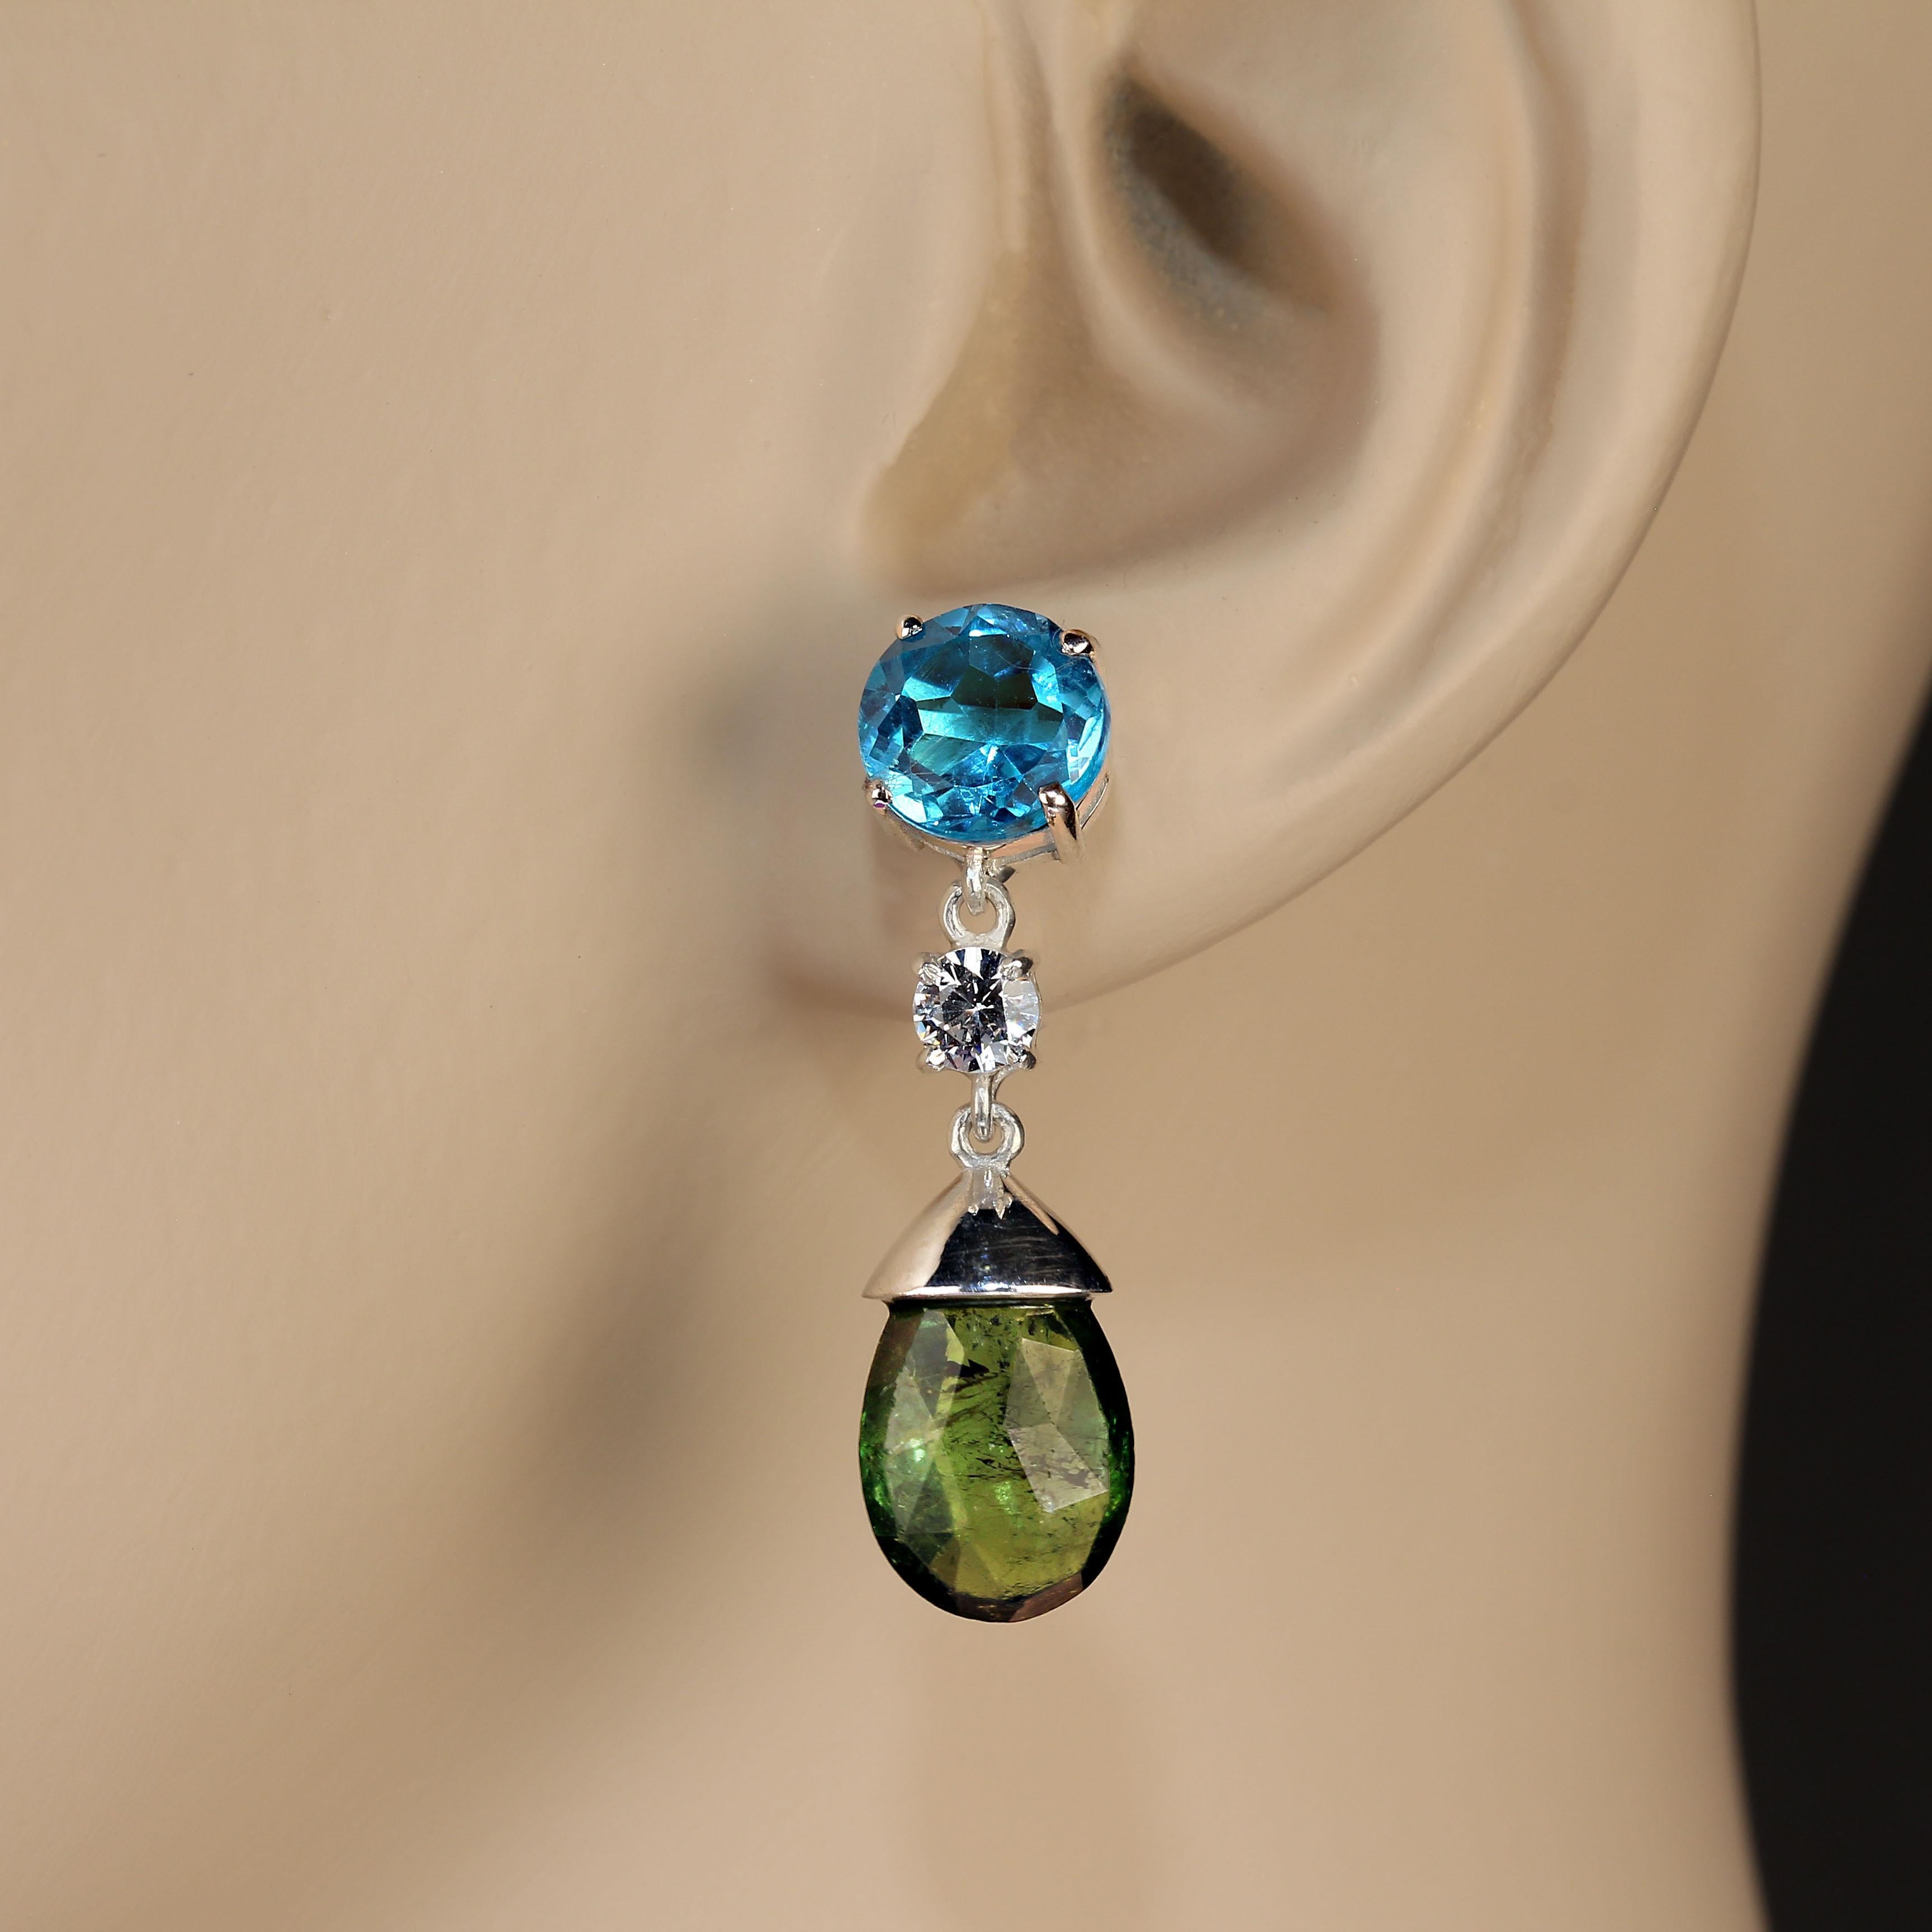 1.25 Inches of dangle and swing in these sparkling earrings of bright blue Apatite and deep green Tourmaline.  The round Apatite weigh total 2.94ct. The faceted briolette Tourmaline weigh total 4.78ct. The genuine zircons weigh total 0.85ct. These